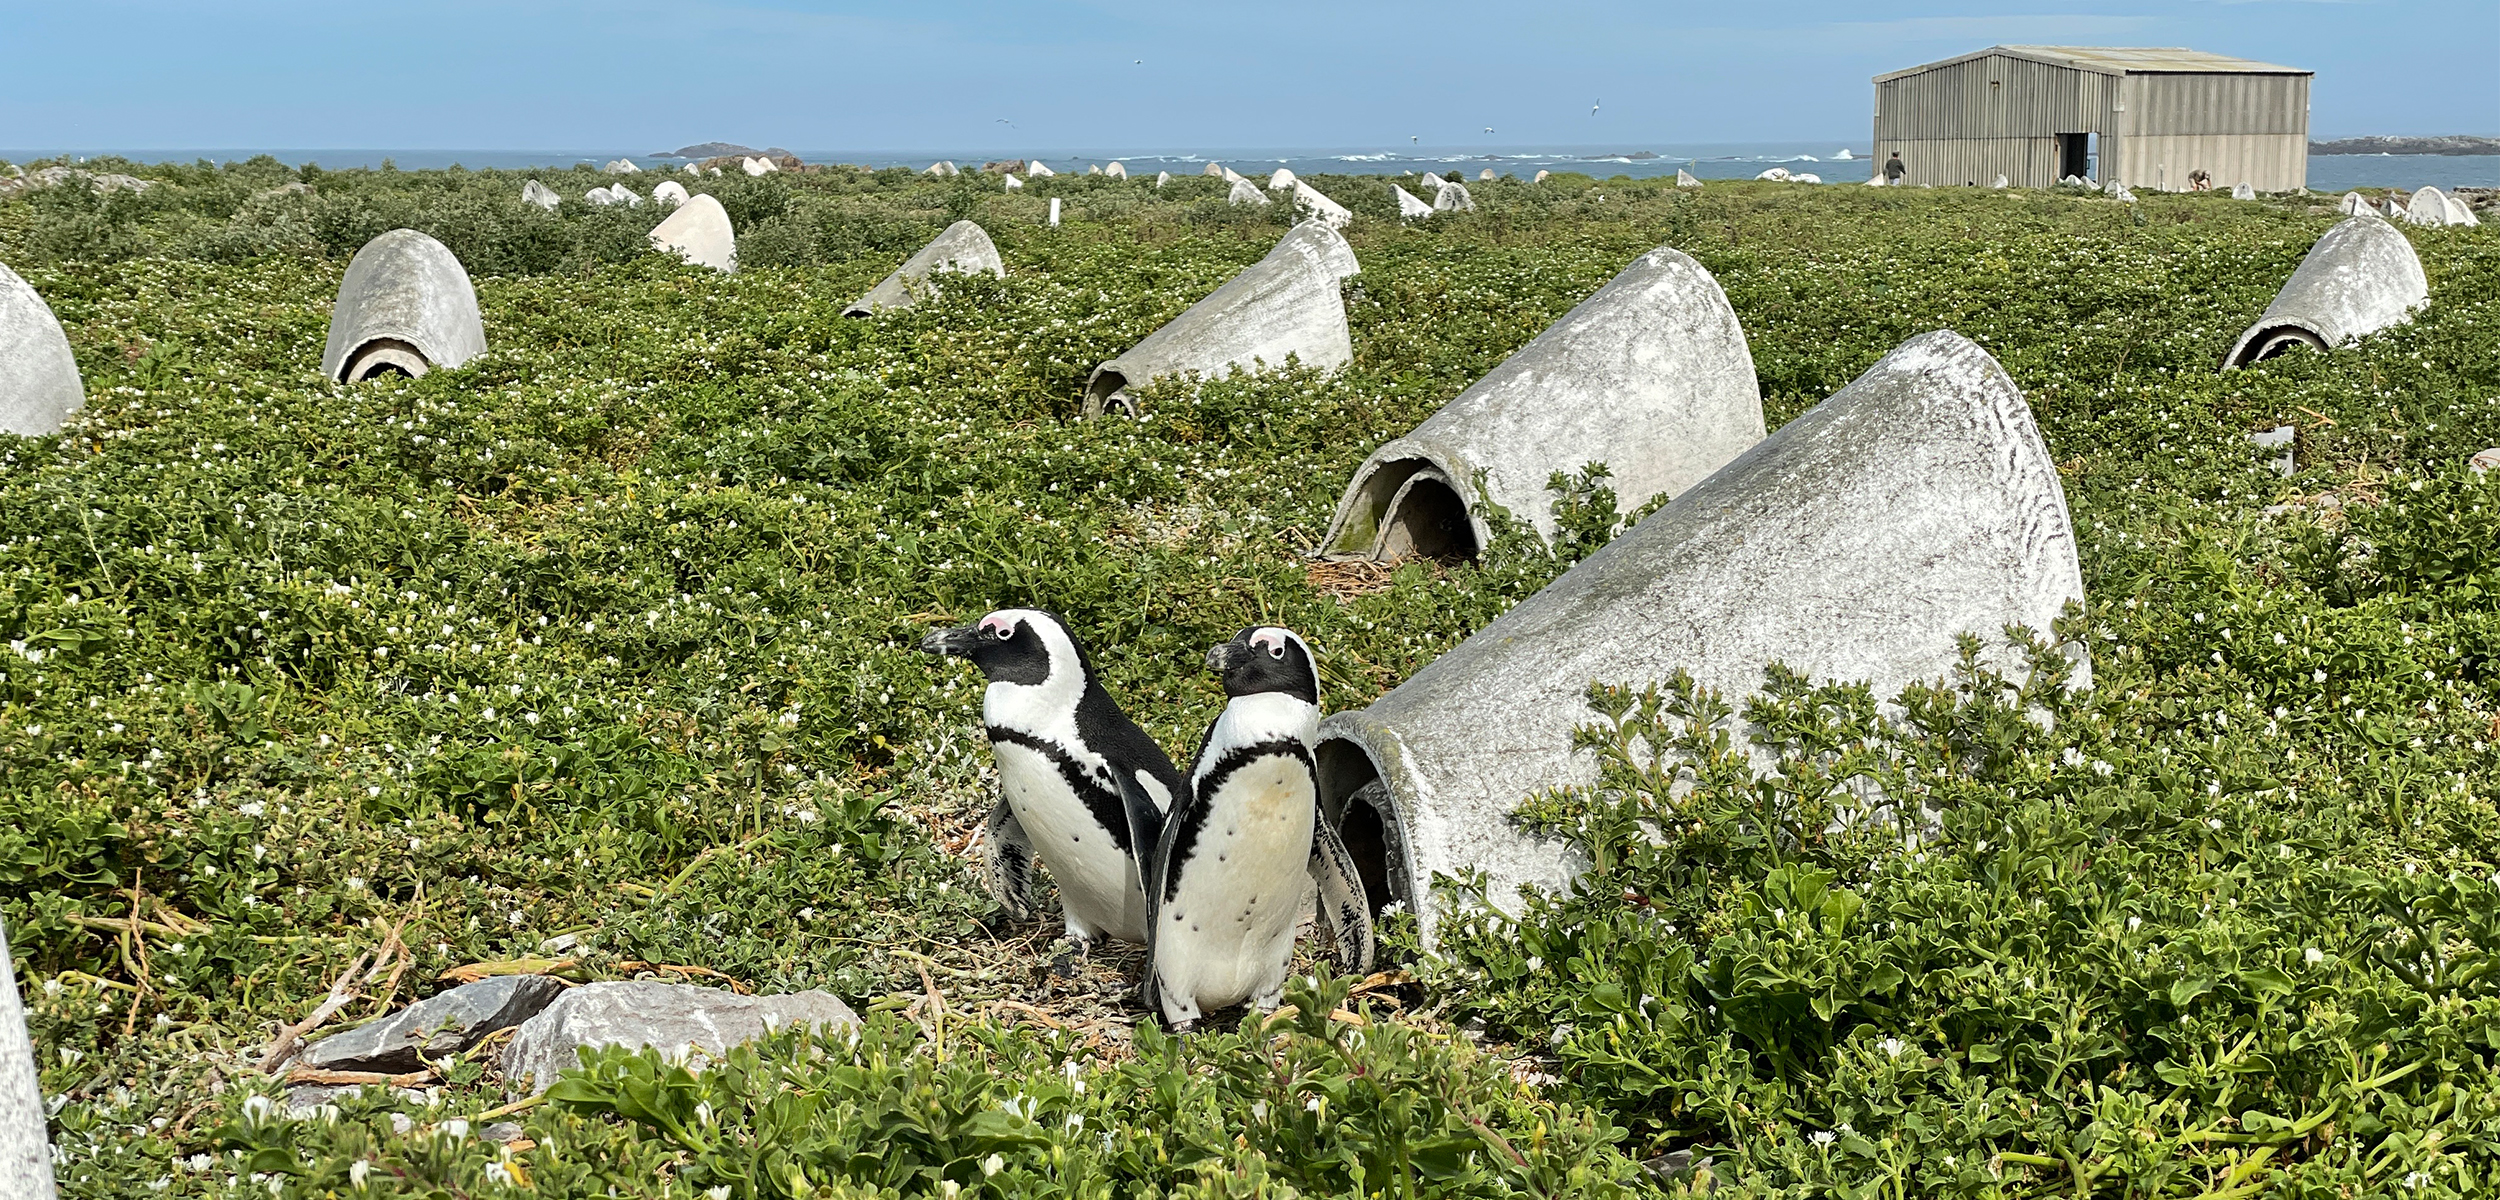 two black and white penguins sitting in a brushy area of green foliage with several grey tube like concrete nests behind.